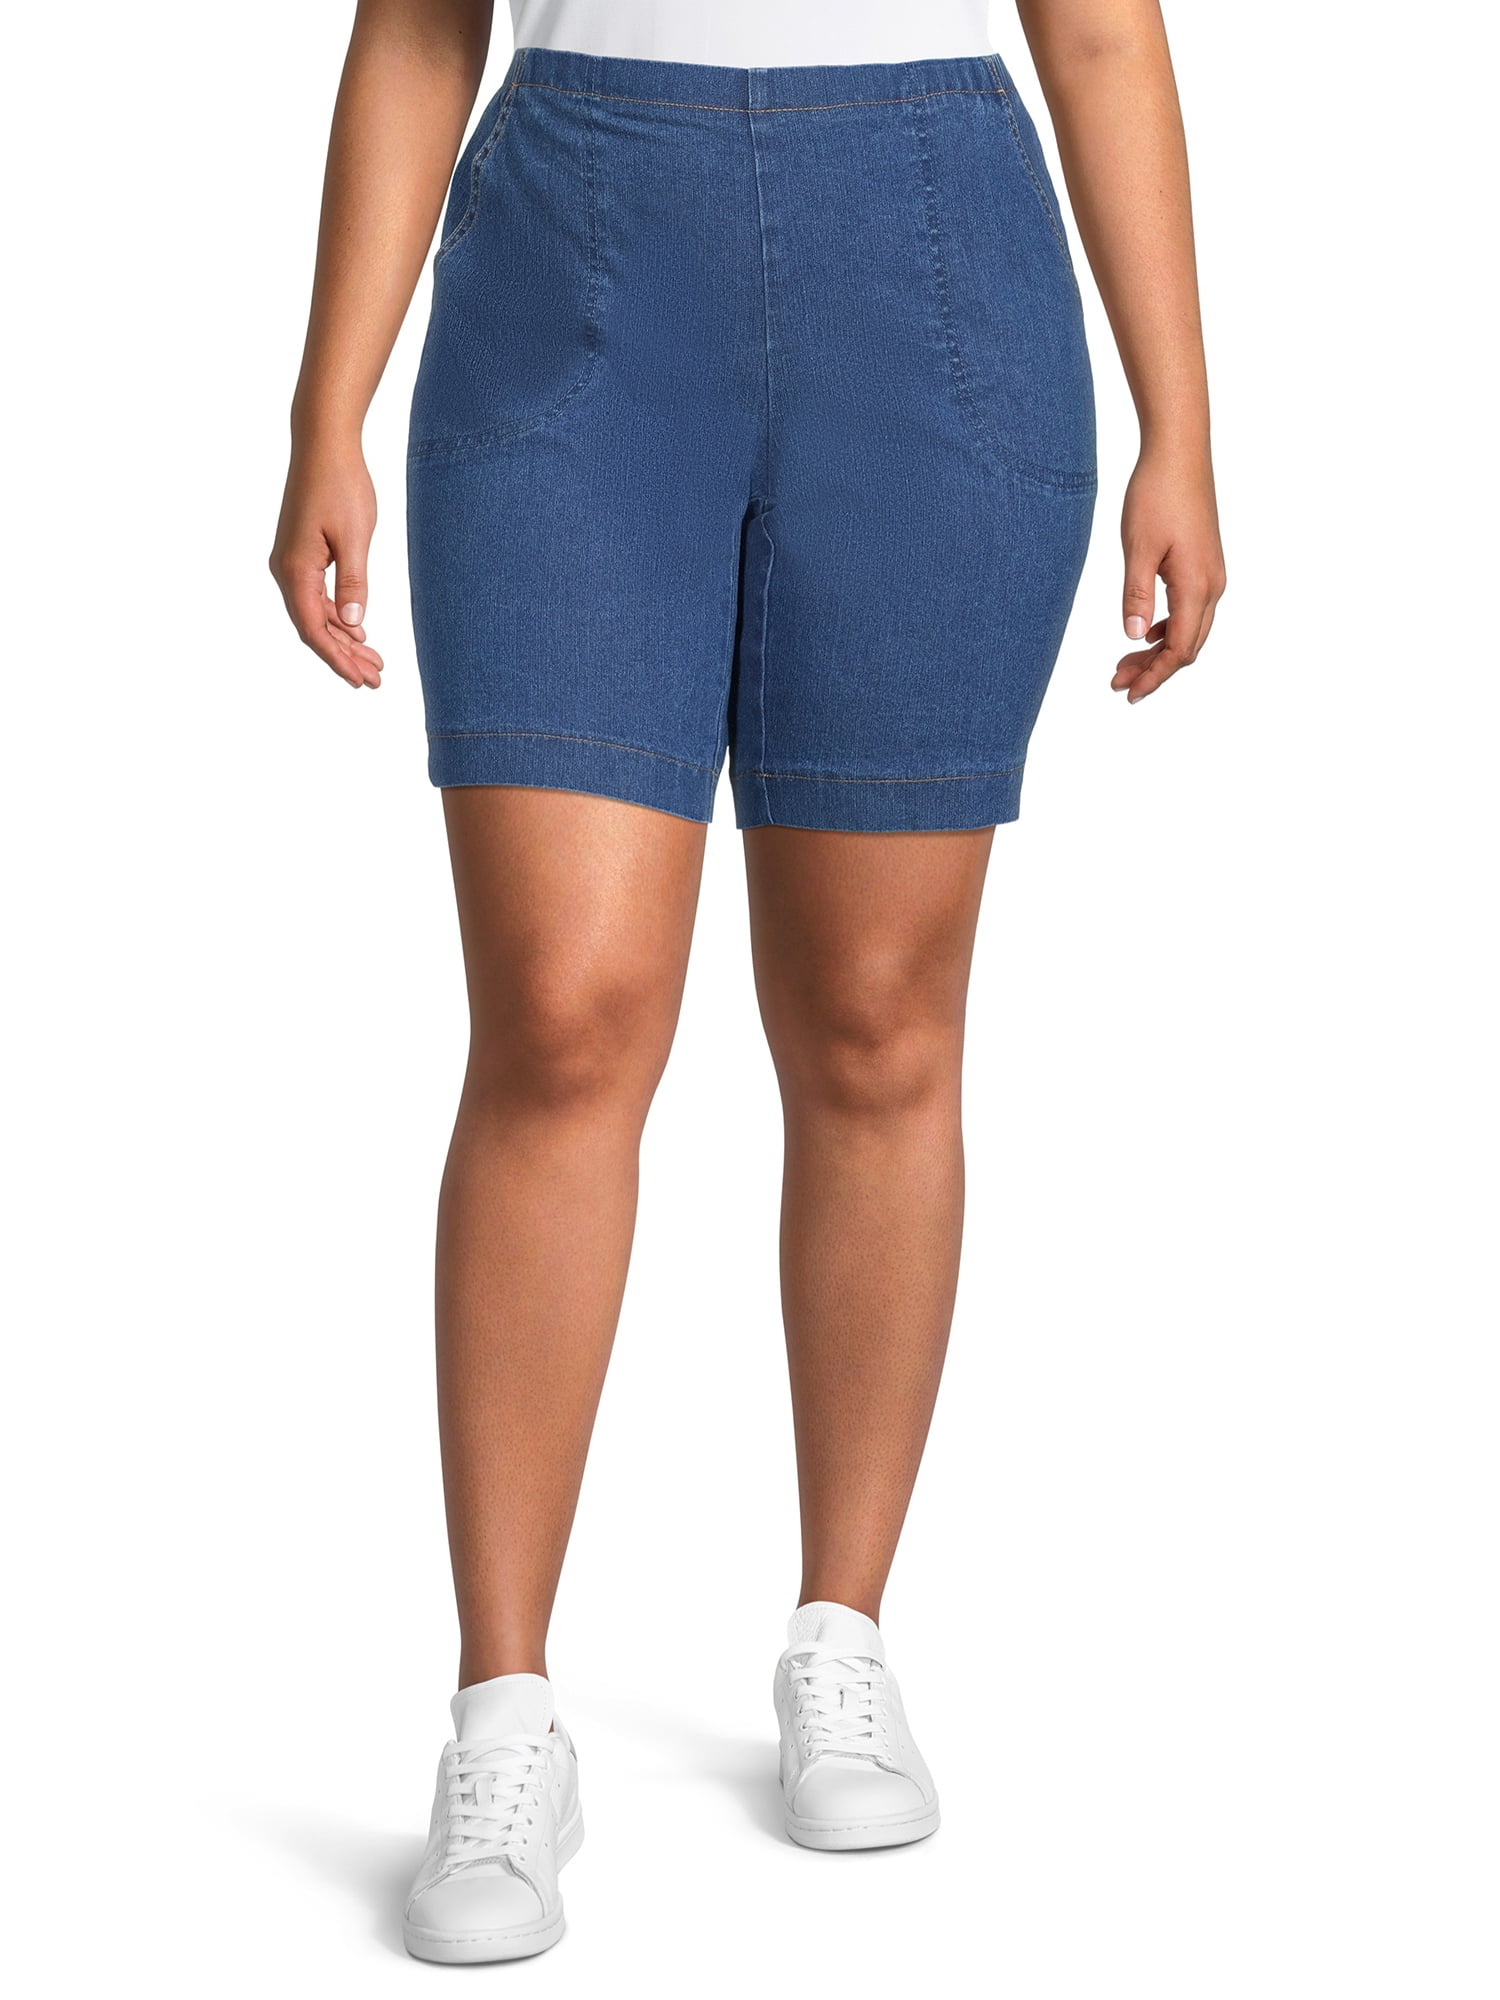 Just My Size Women's Plus Size 2 Pocket Pull-On Shorts 